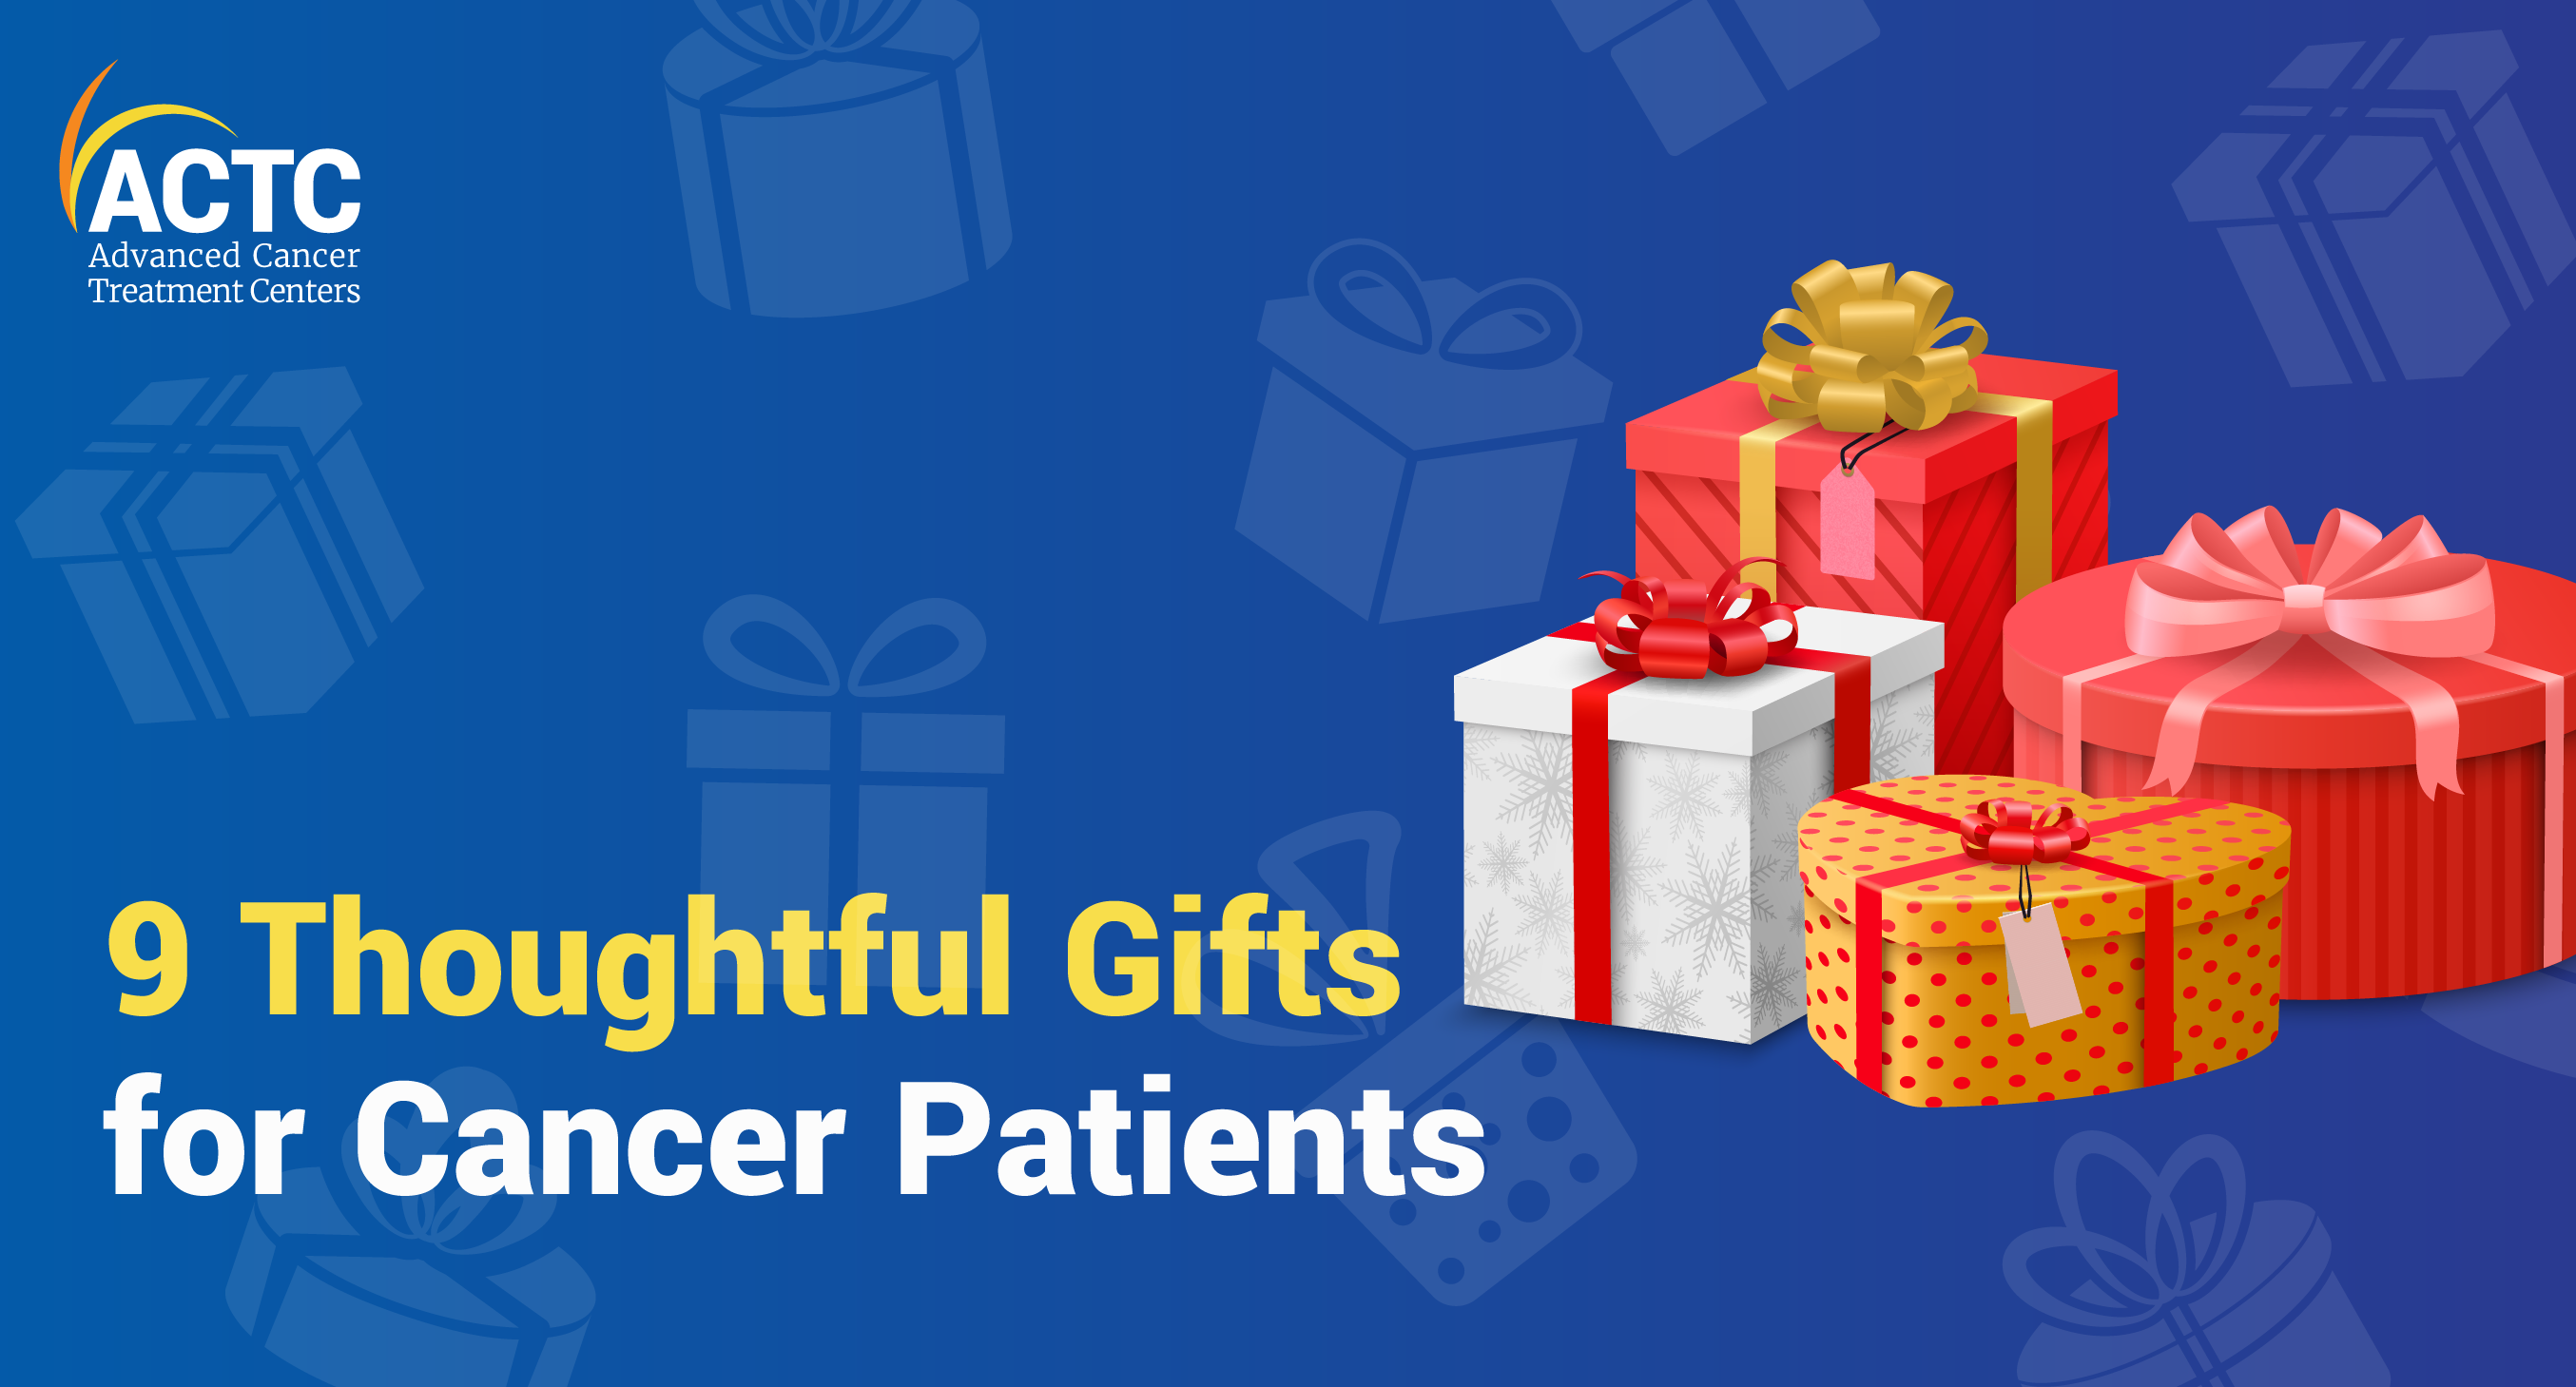 9 Thoughtful Gifts for Cancer Patients